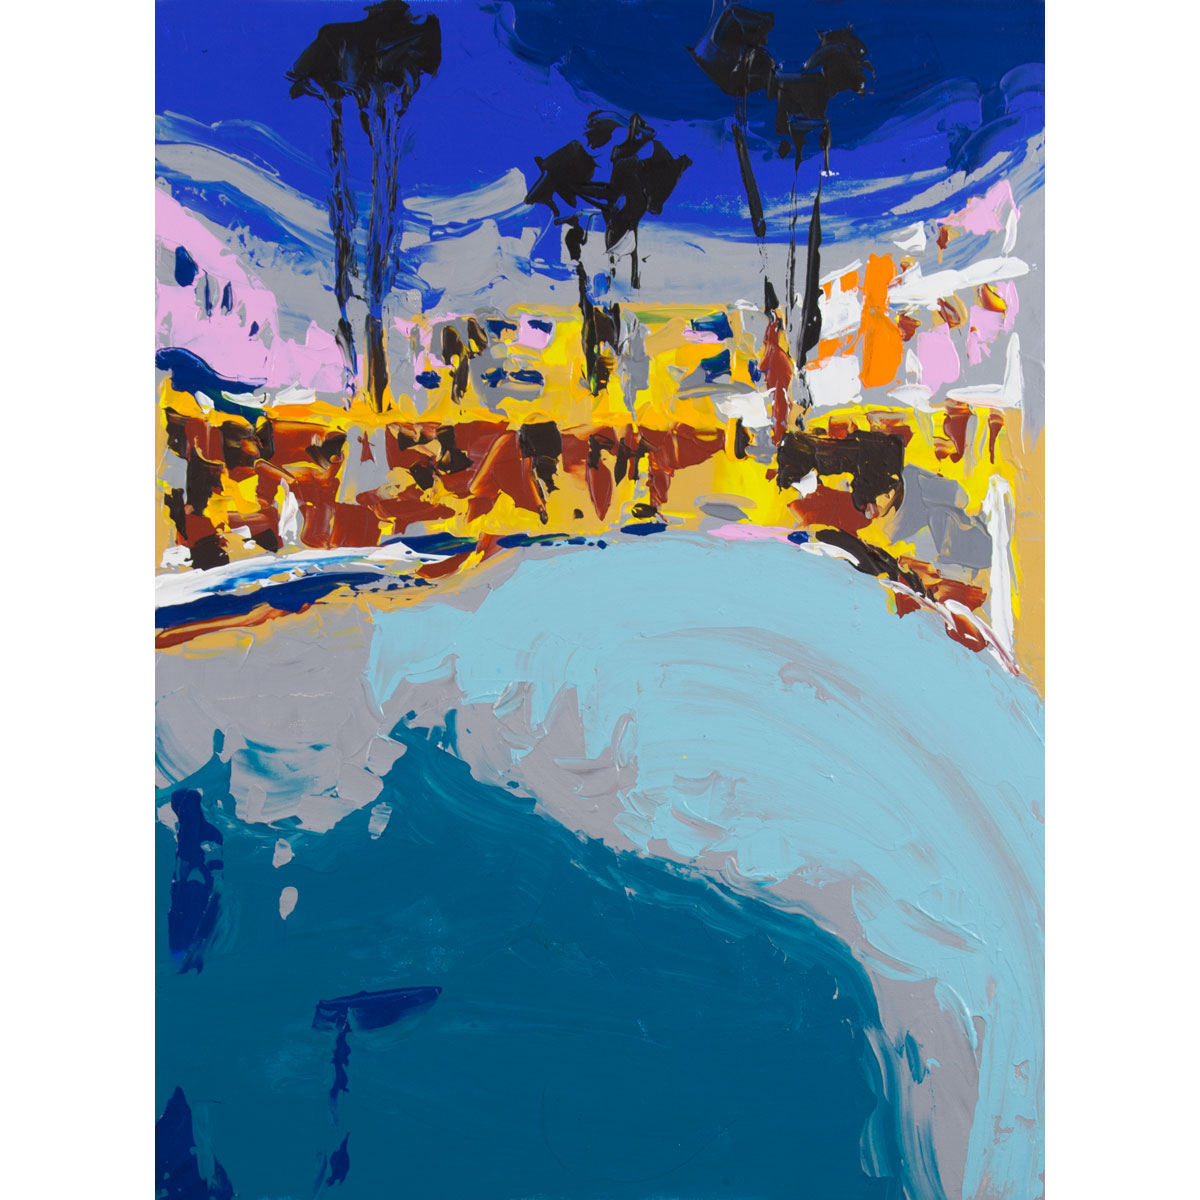 Philippe Le Miere 'palm springs saguaro party pool'